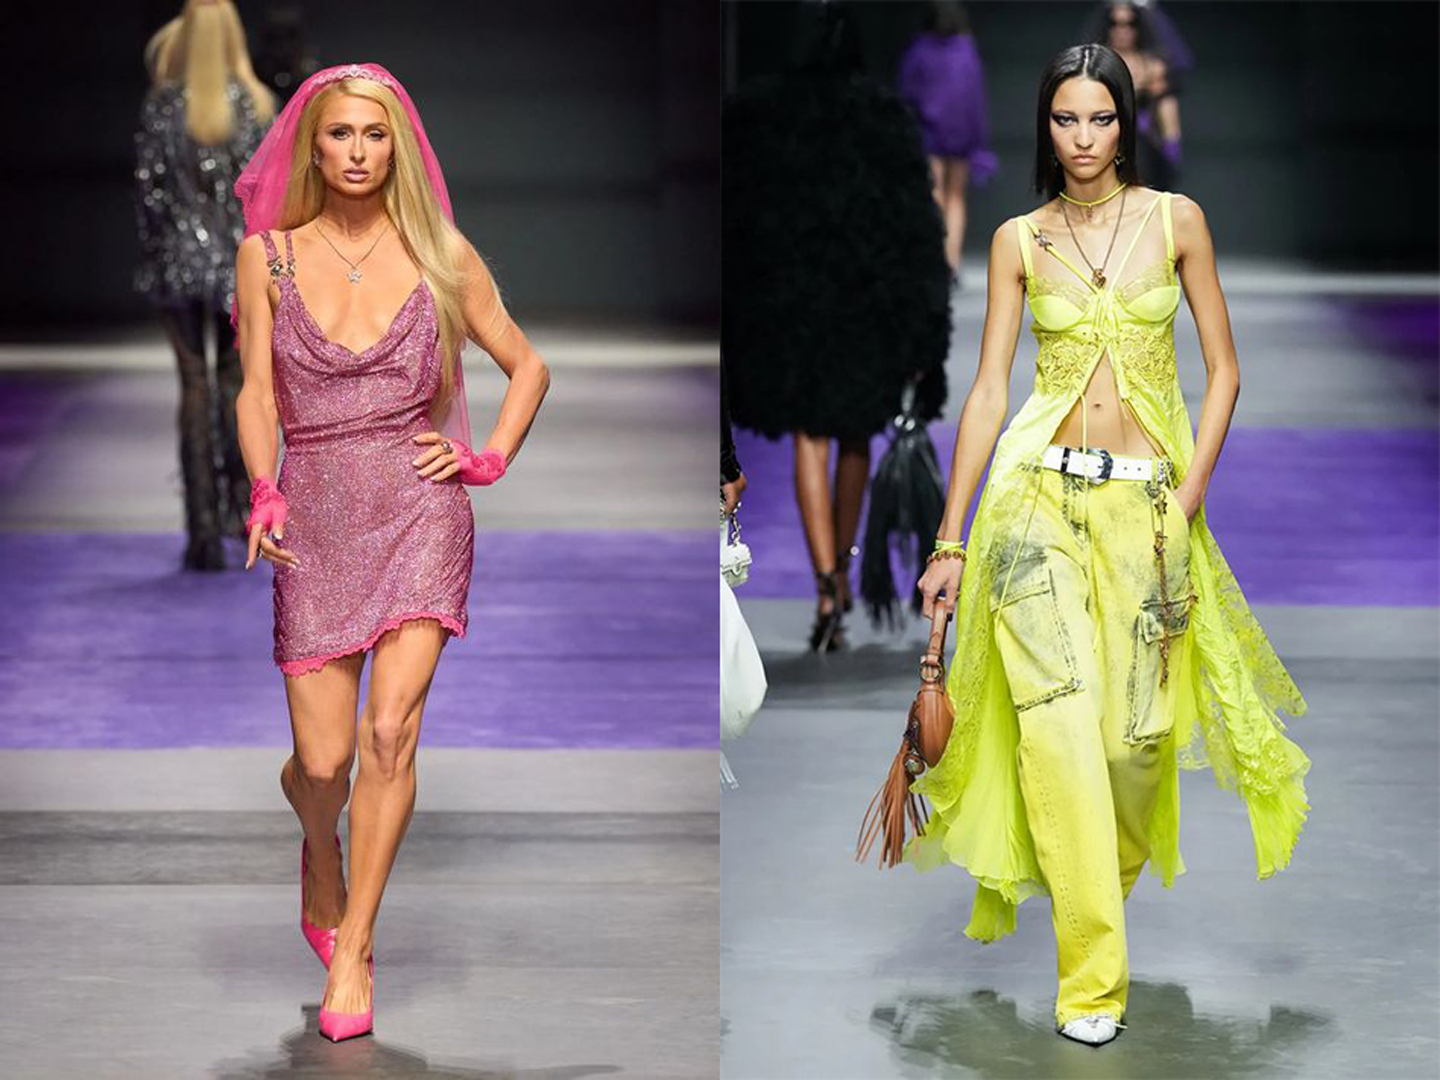 Looks from the Versace spring-summer 2023 catwalk in Milan. 2000s icon Paris Hilton closed the show imagined by Donatella Versace